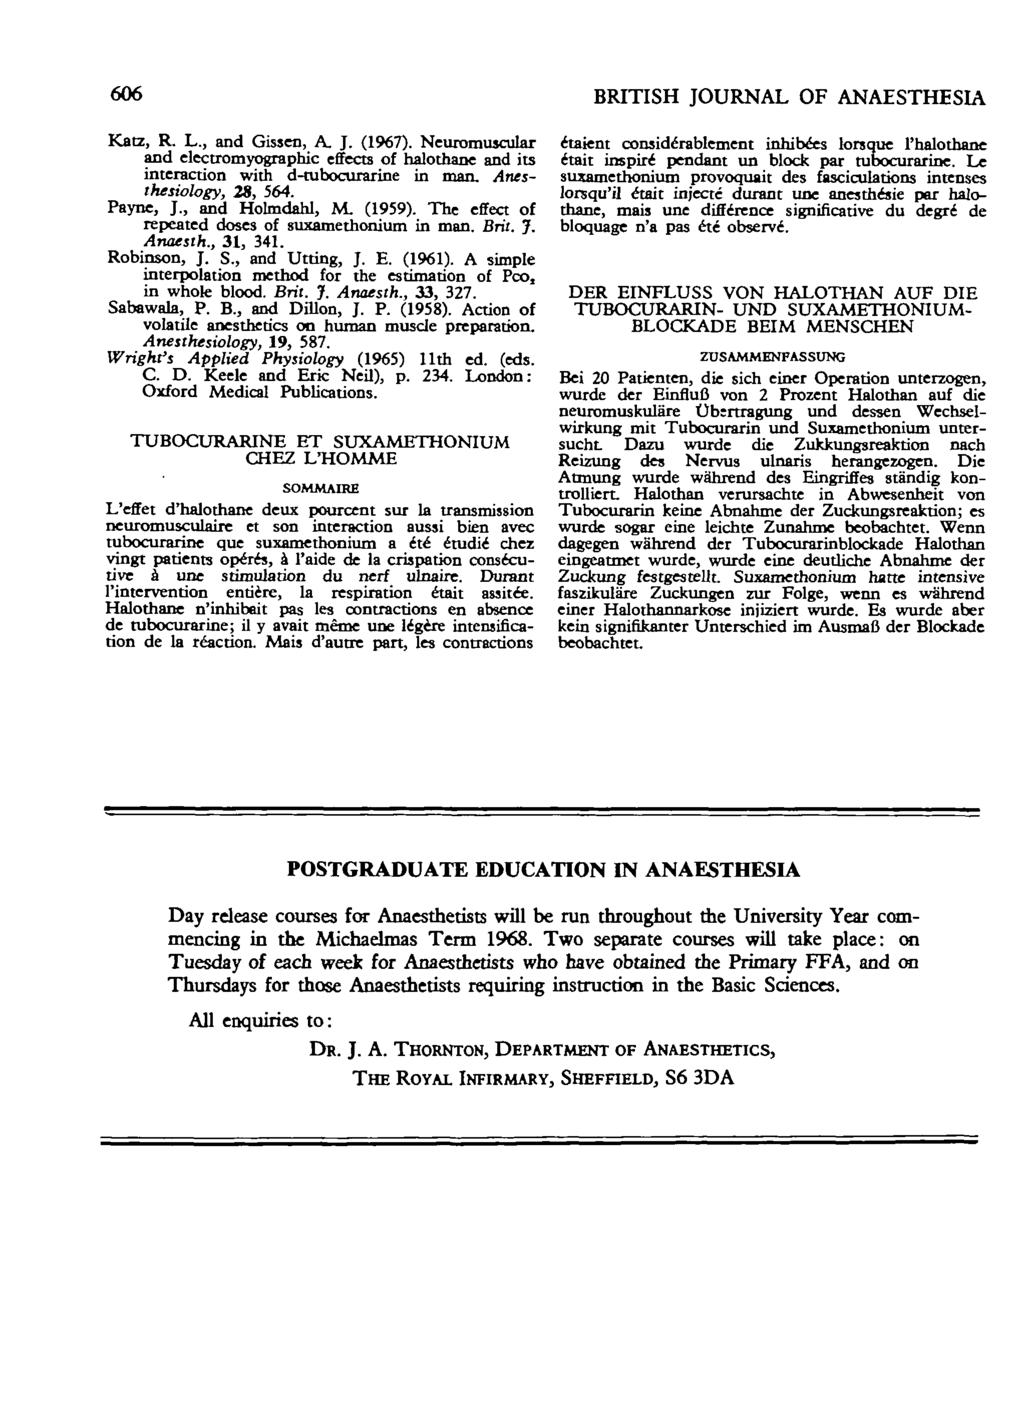 606 BRITISH JOURNAL OF ANAESTHESIA Katz, R. L., and Gissen, A. J. (1967).